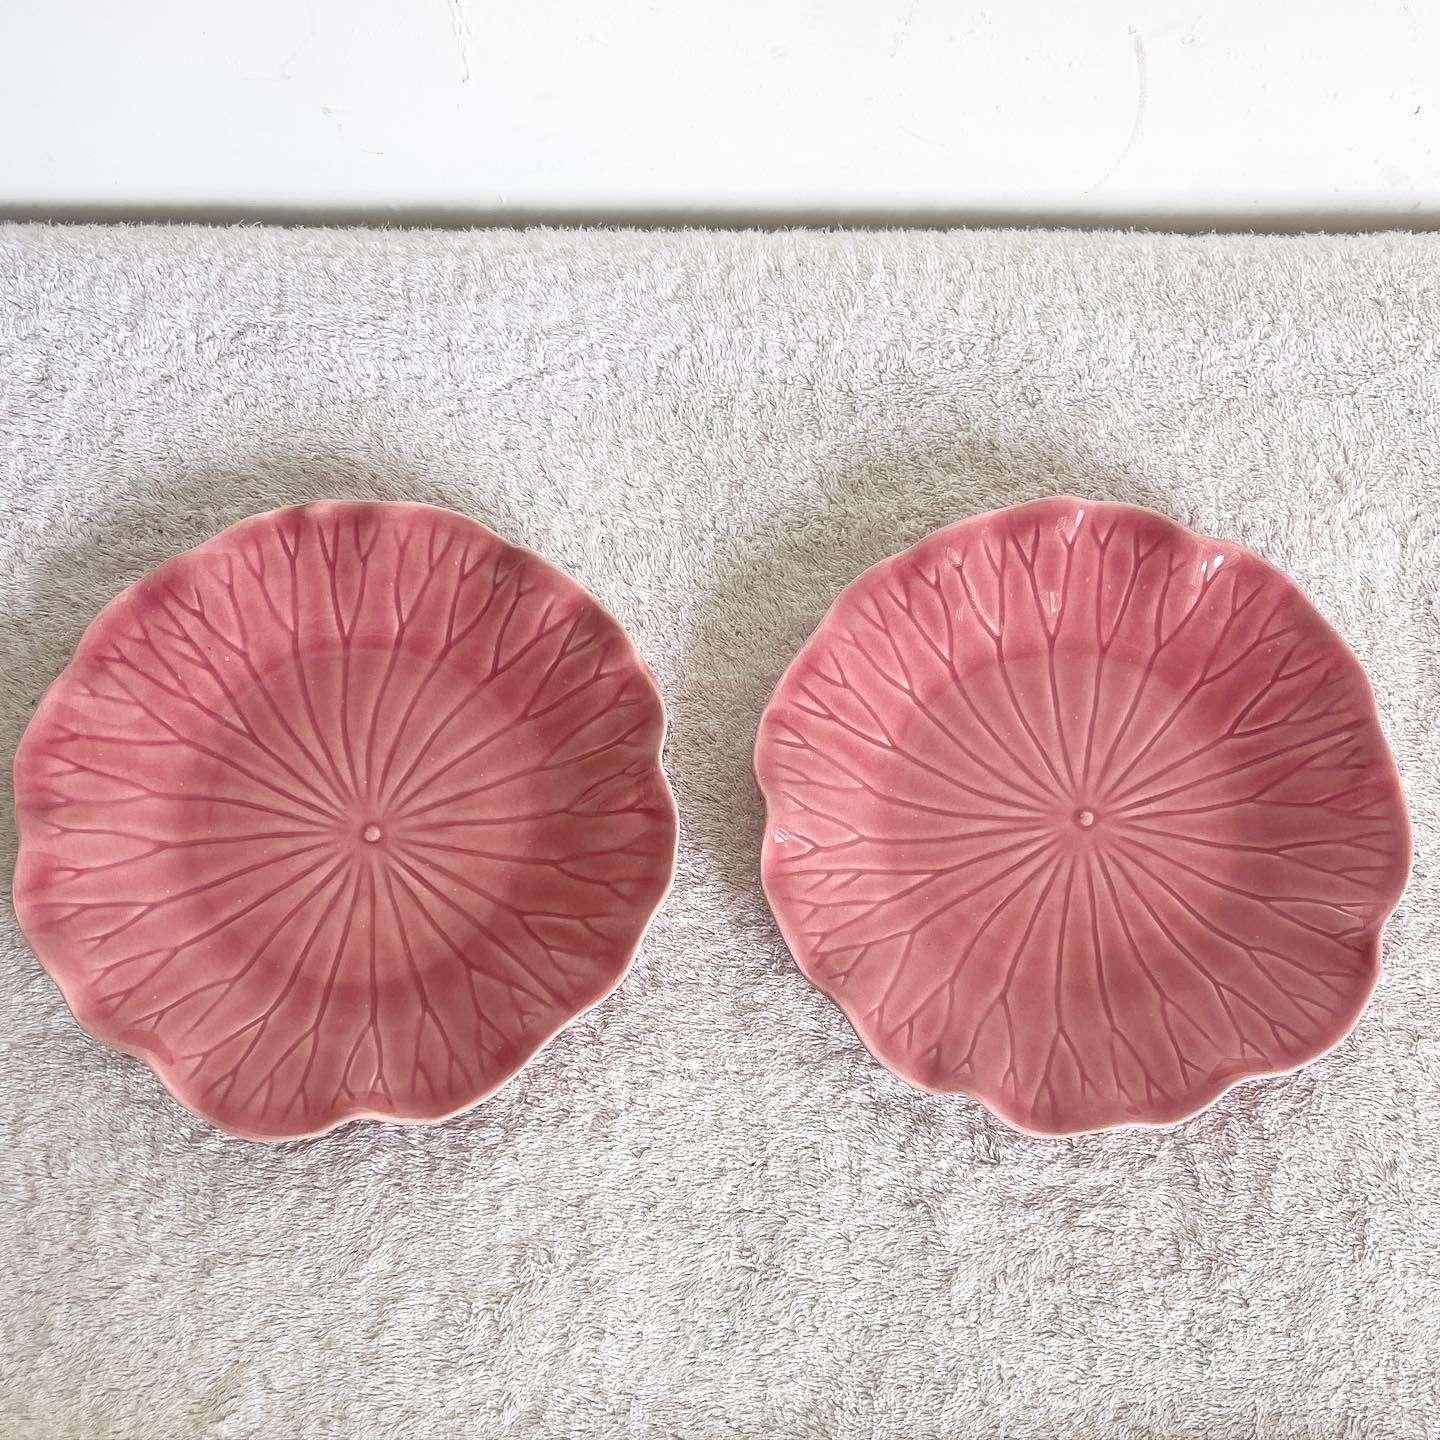 Elevate your table settings with this exceptional pair of vintage pink Metlox Poppytrail Lotus plates. Crafted with care, these plates exude timeless elegance and charm.

Exceptional pair of vintage pink Metlox Poppytrail Lotus plates
Crafted with